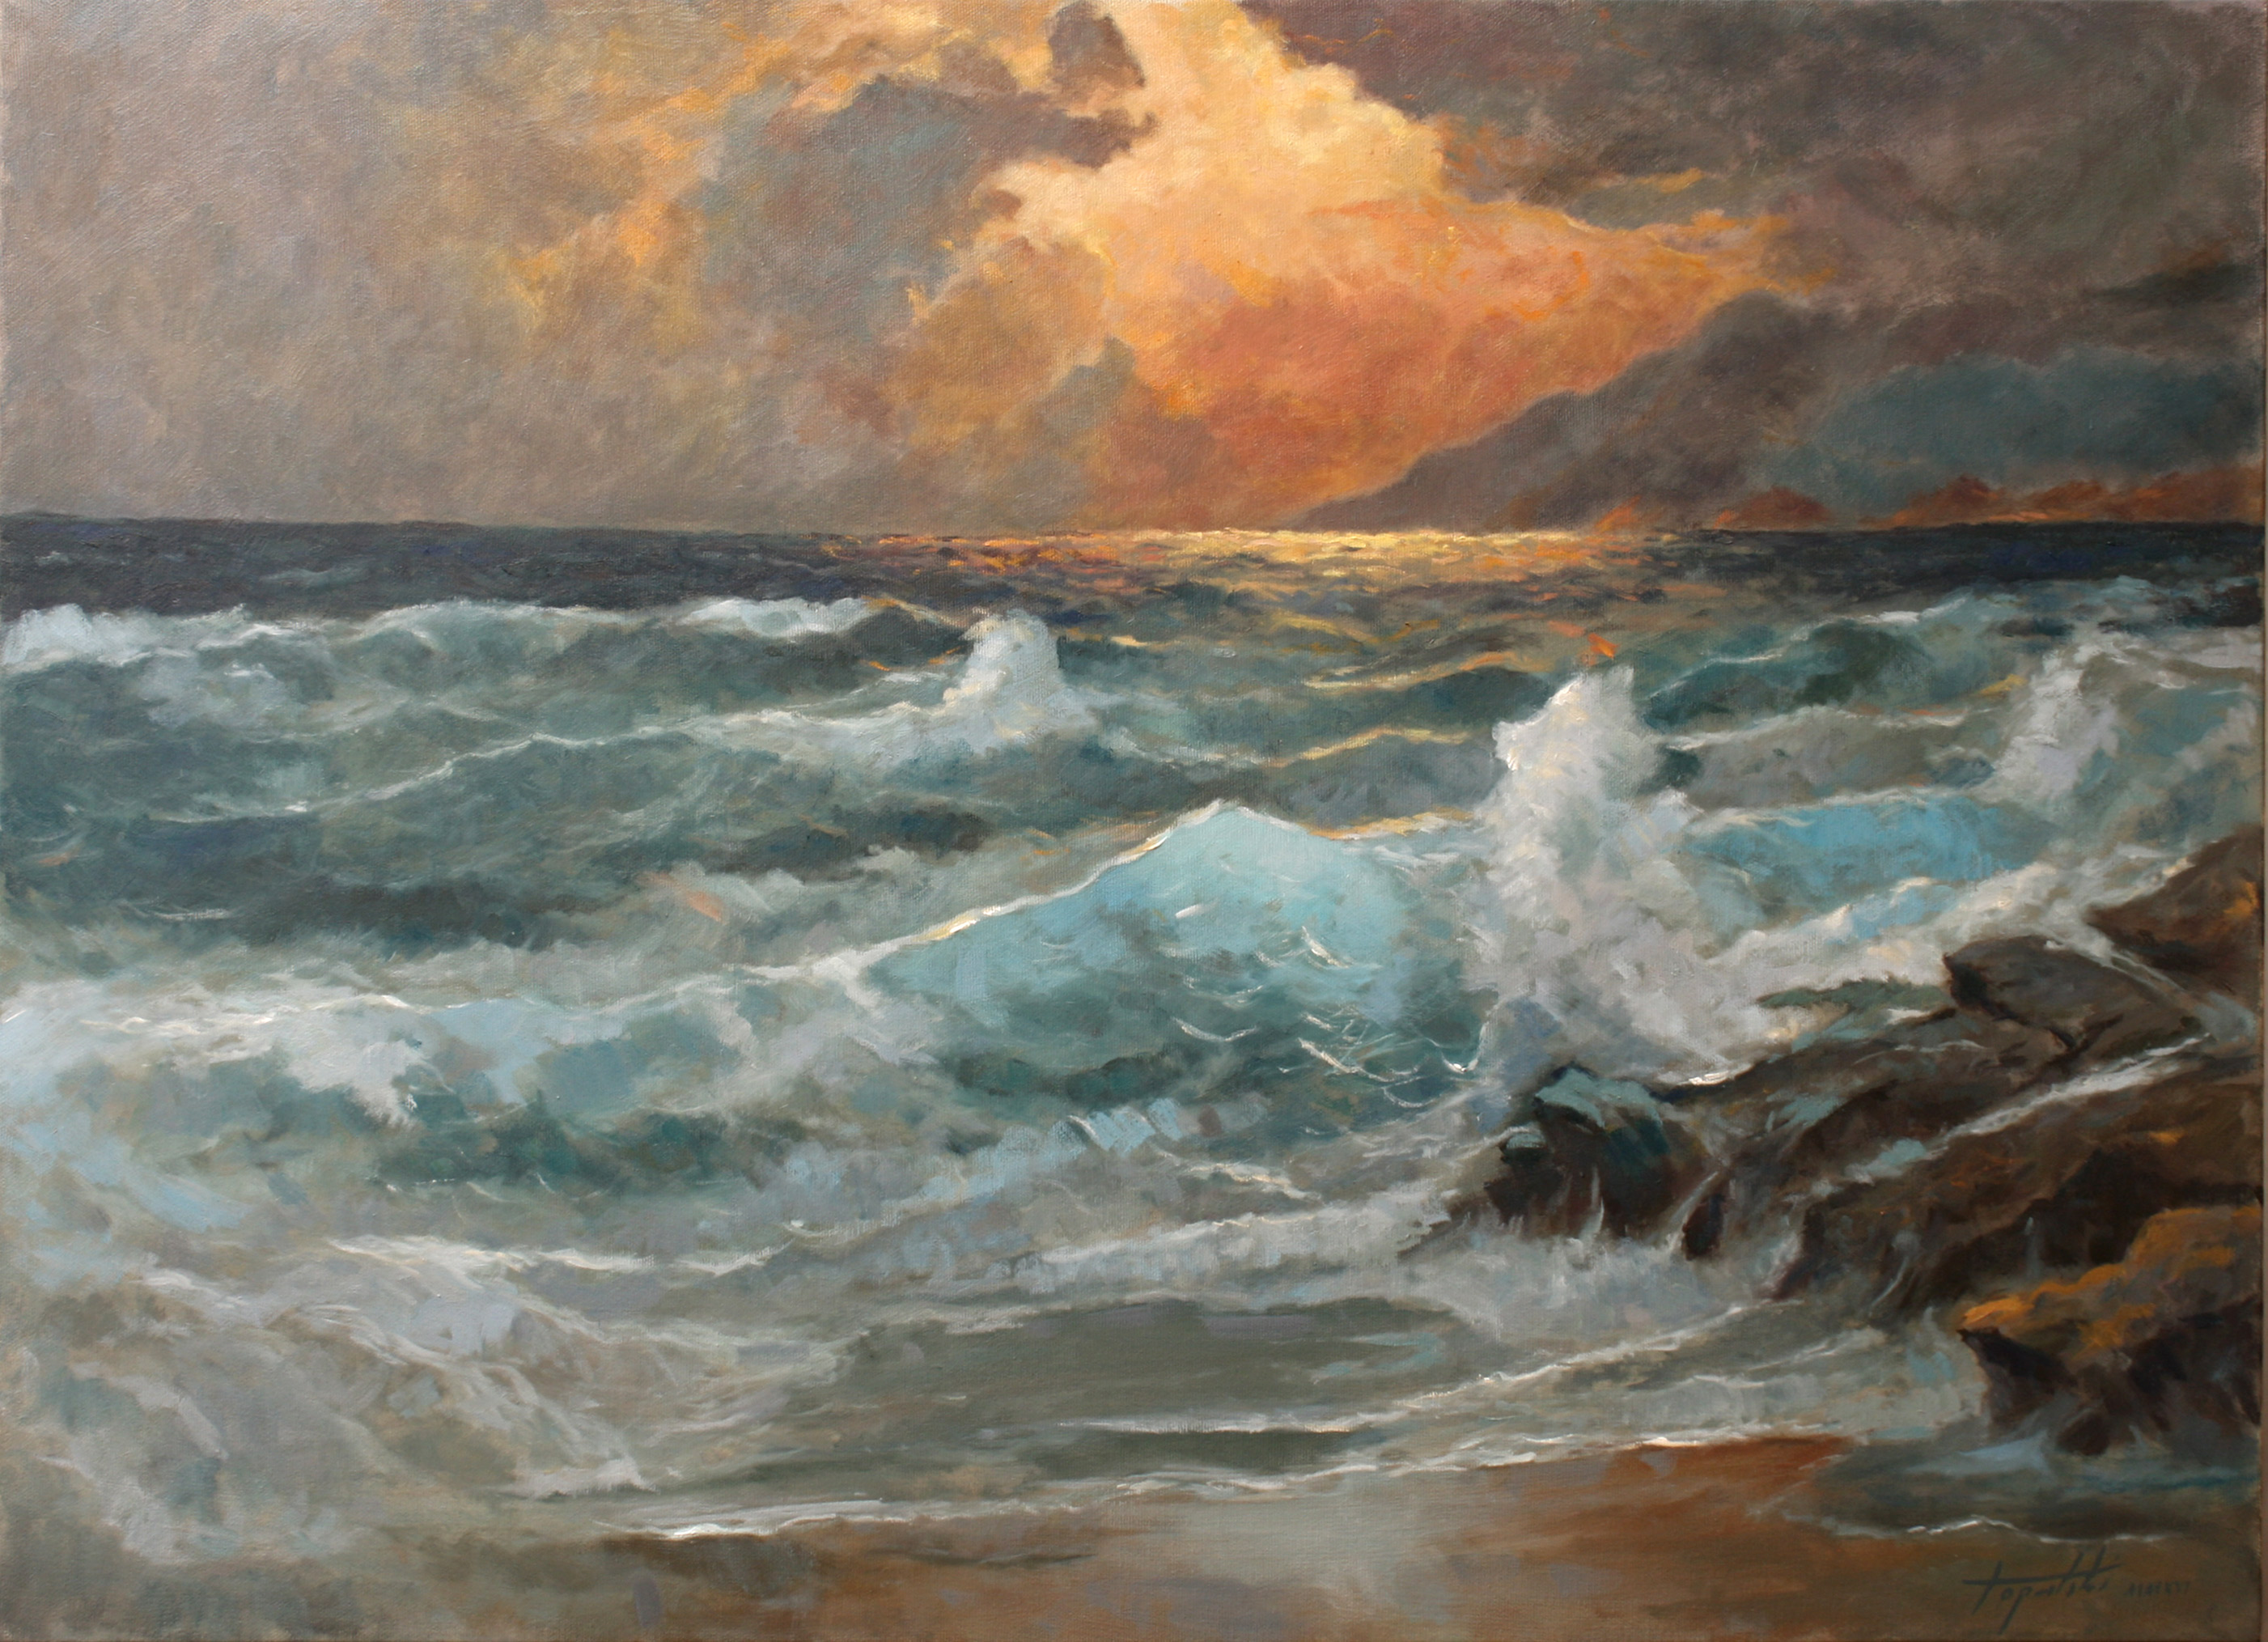 Eventide Sea and Waves Oil Painting Fine Arts Gallery Original